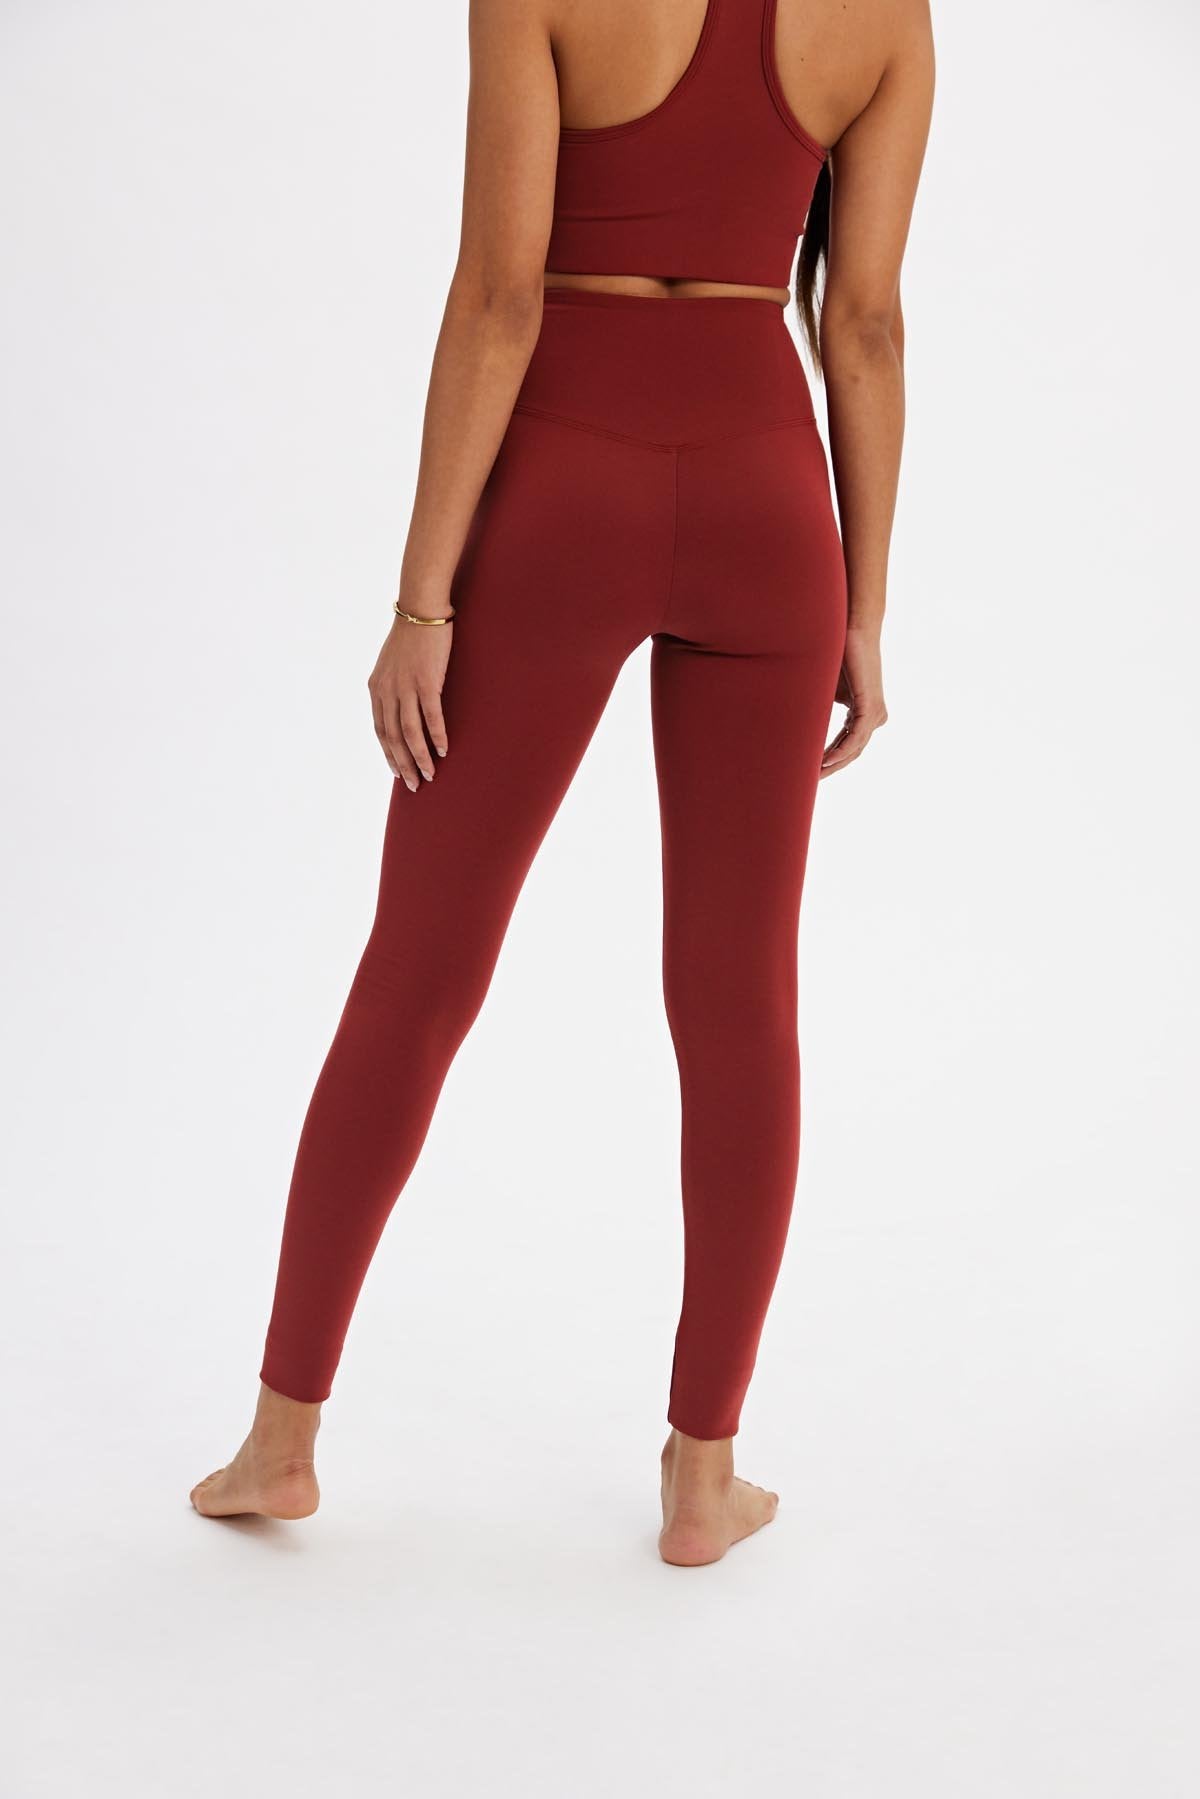 Verso - Our Plain Leggings in Grey, Navy and Burgundy are